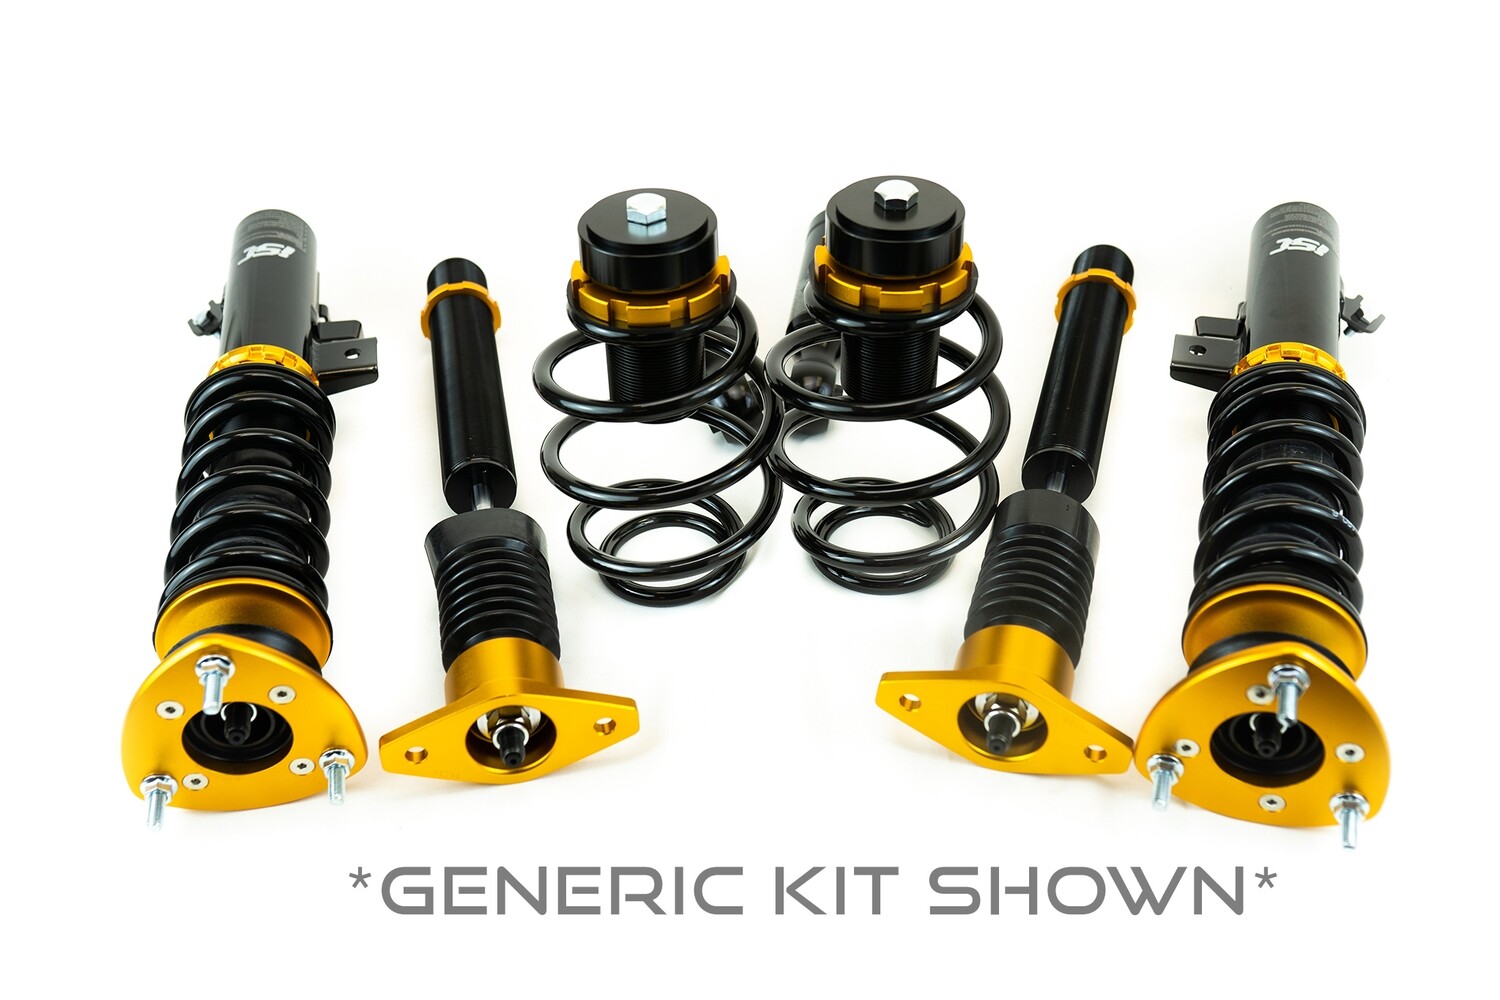 Volkswagen Jetta Mk5 05-10 ISC V2 Basic Coilover Suspension With Coilover Covers